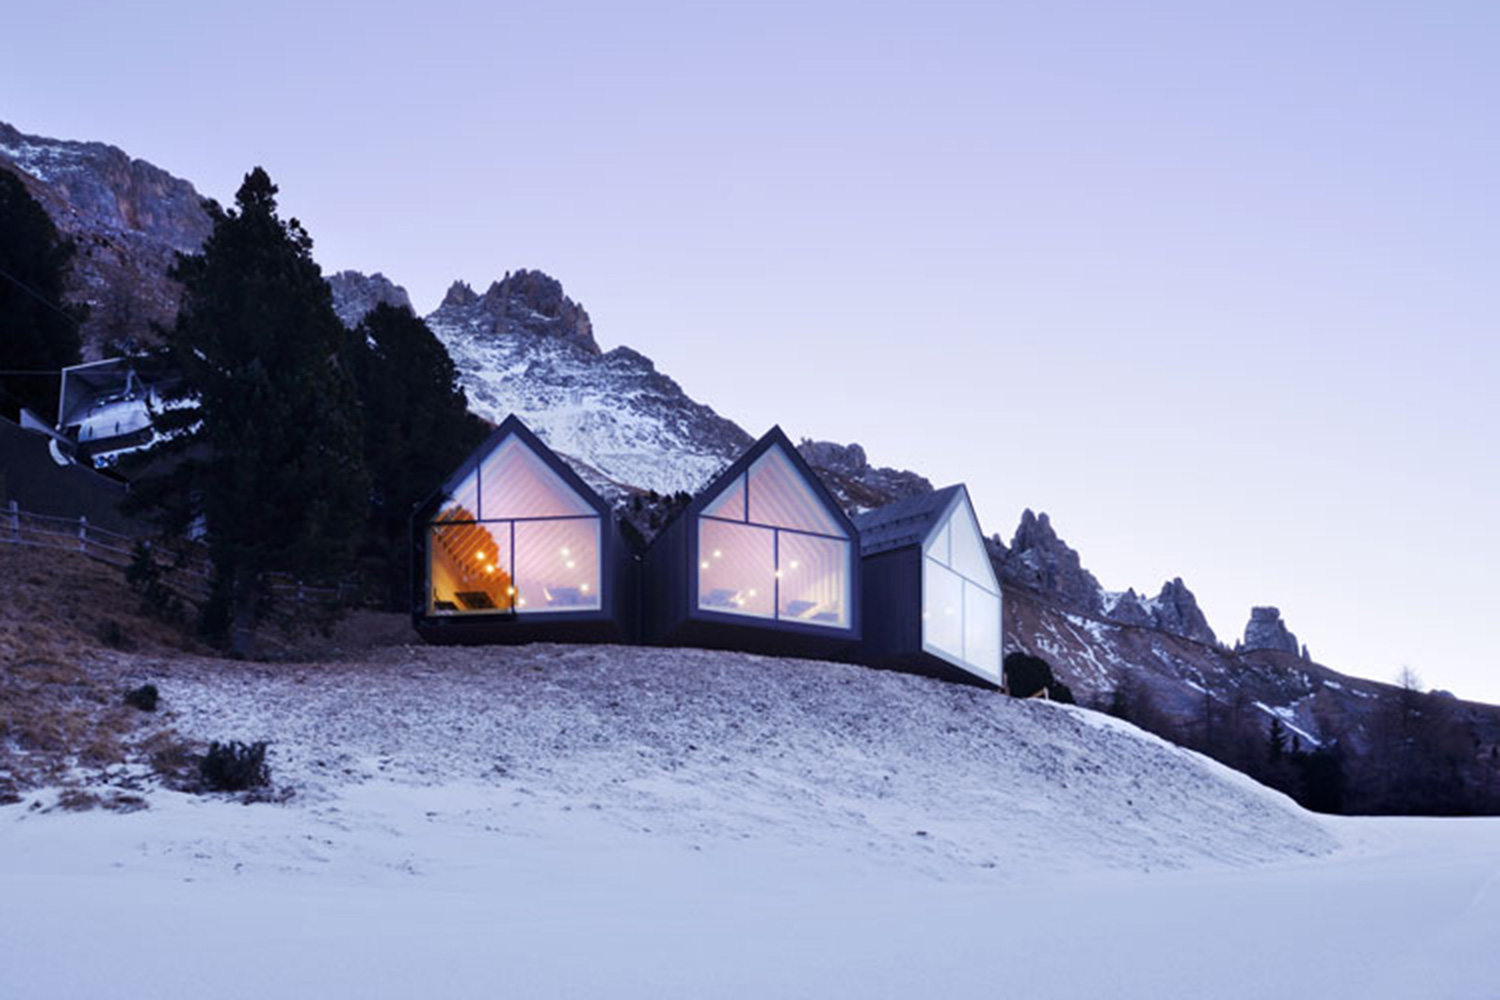 oberholz mountain hut italy peter pichler architecture 1